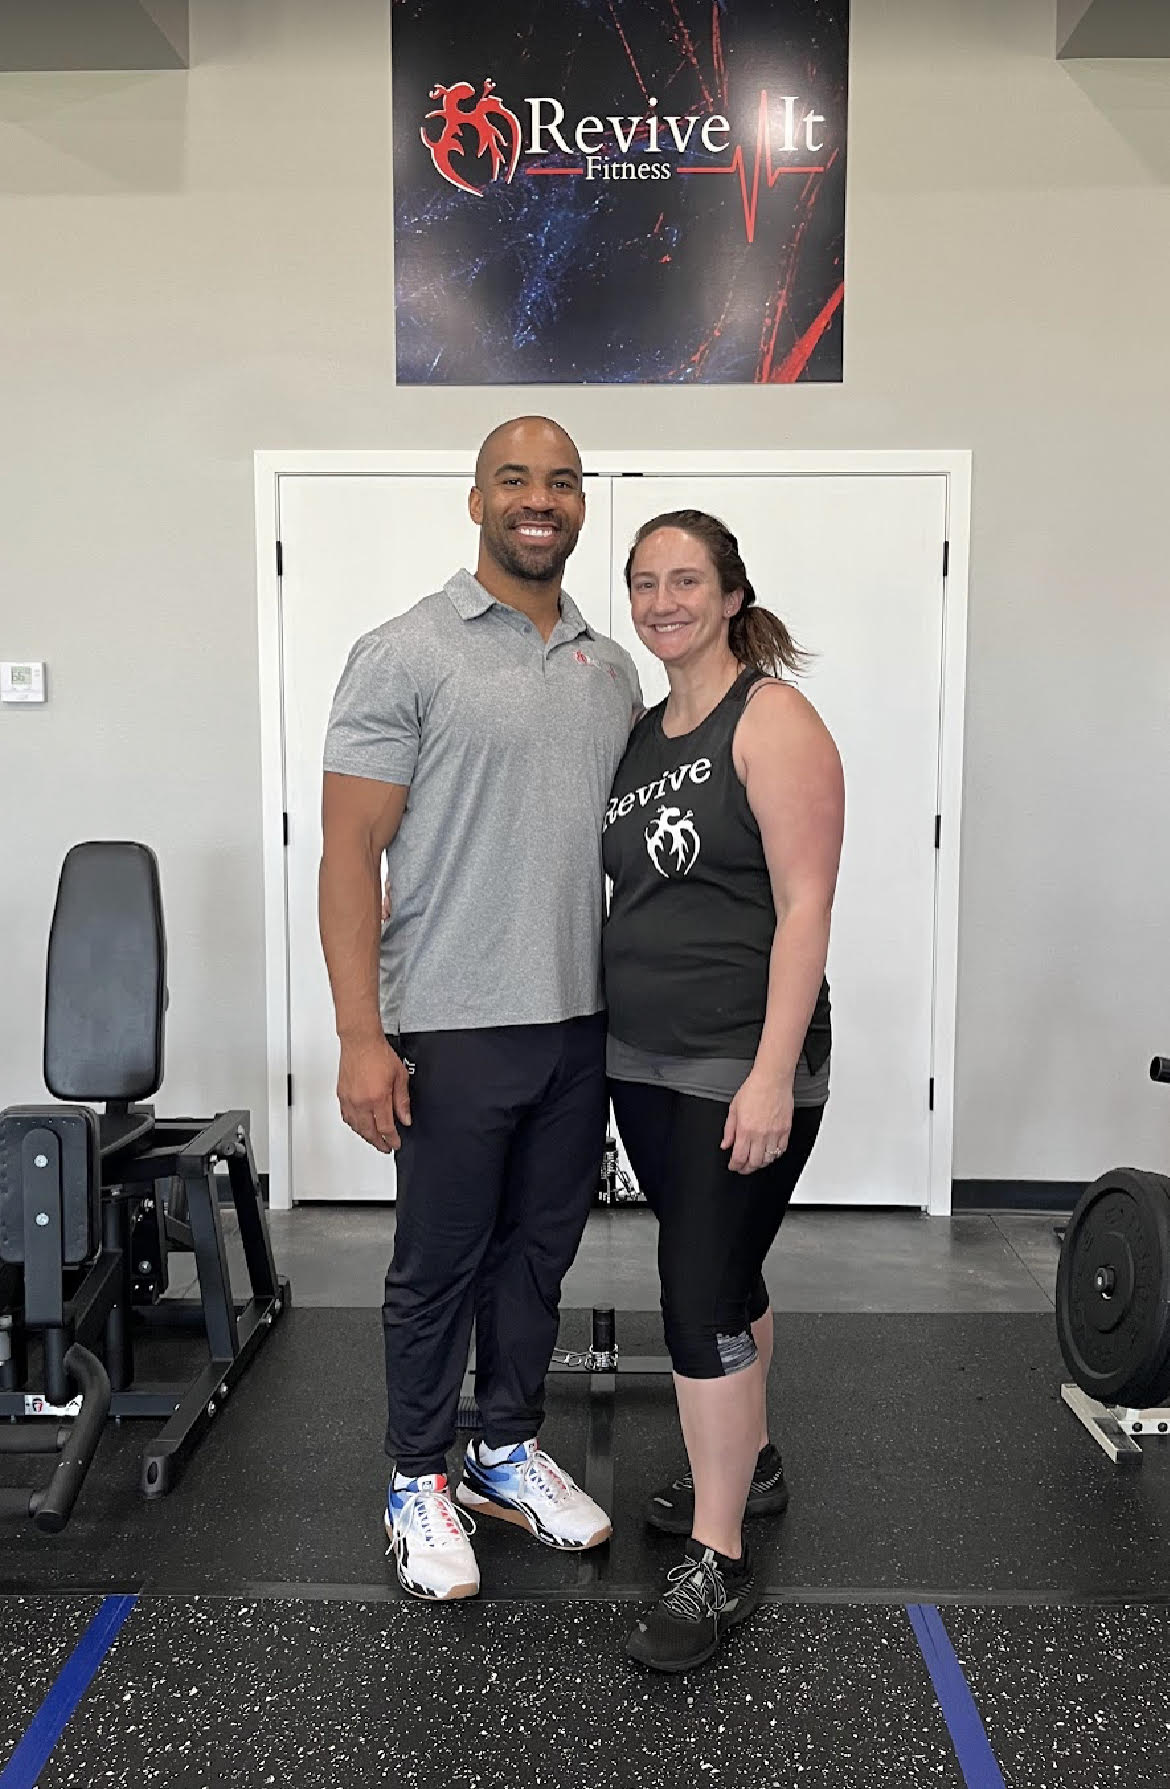 A Quality Fitness Boot Camp & Gym in Troy: The Story of Revive It Fitness